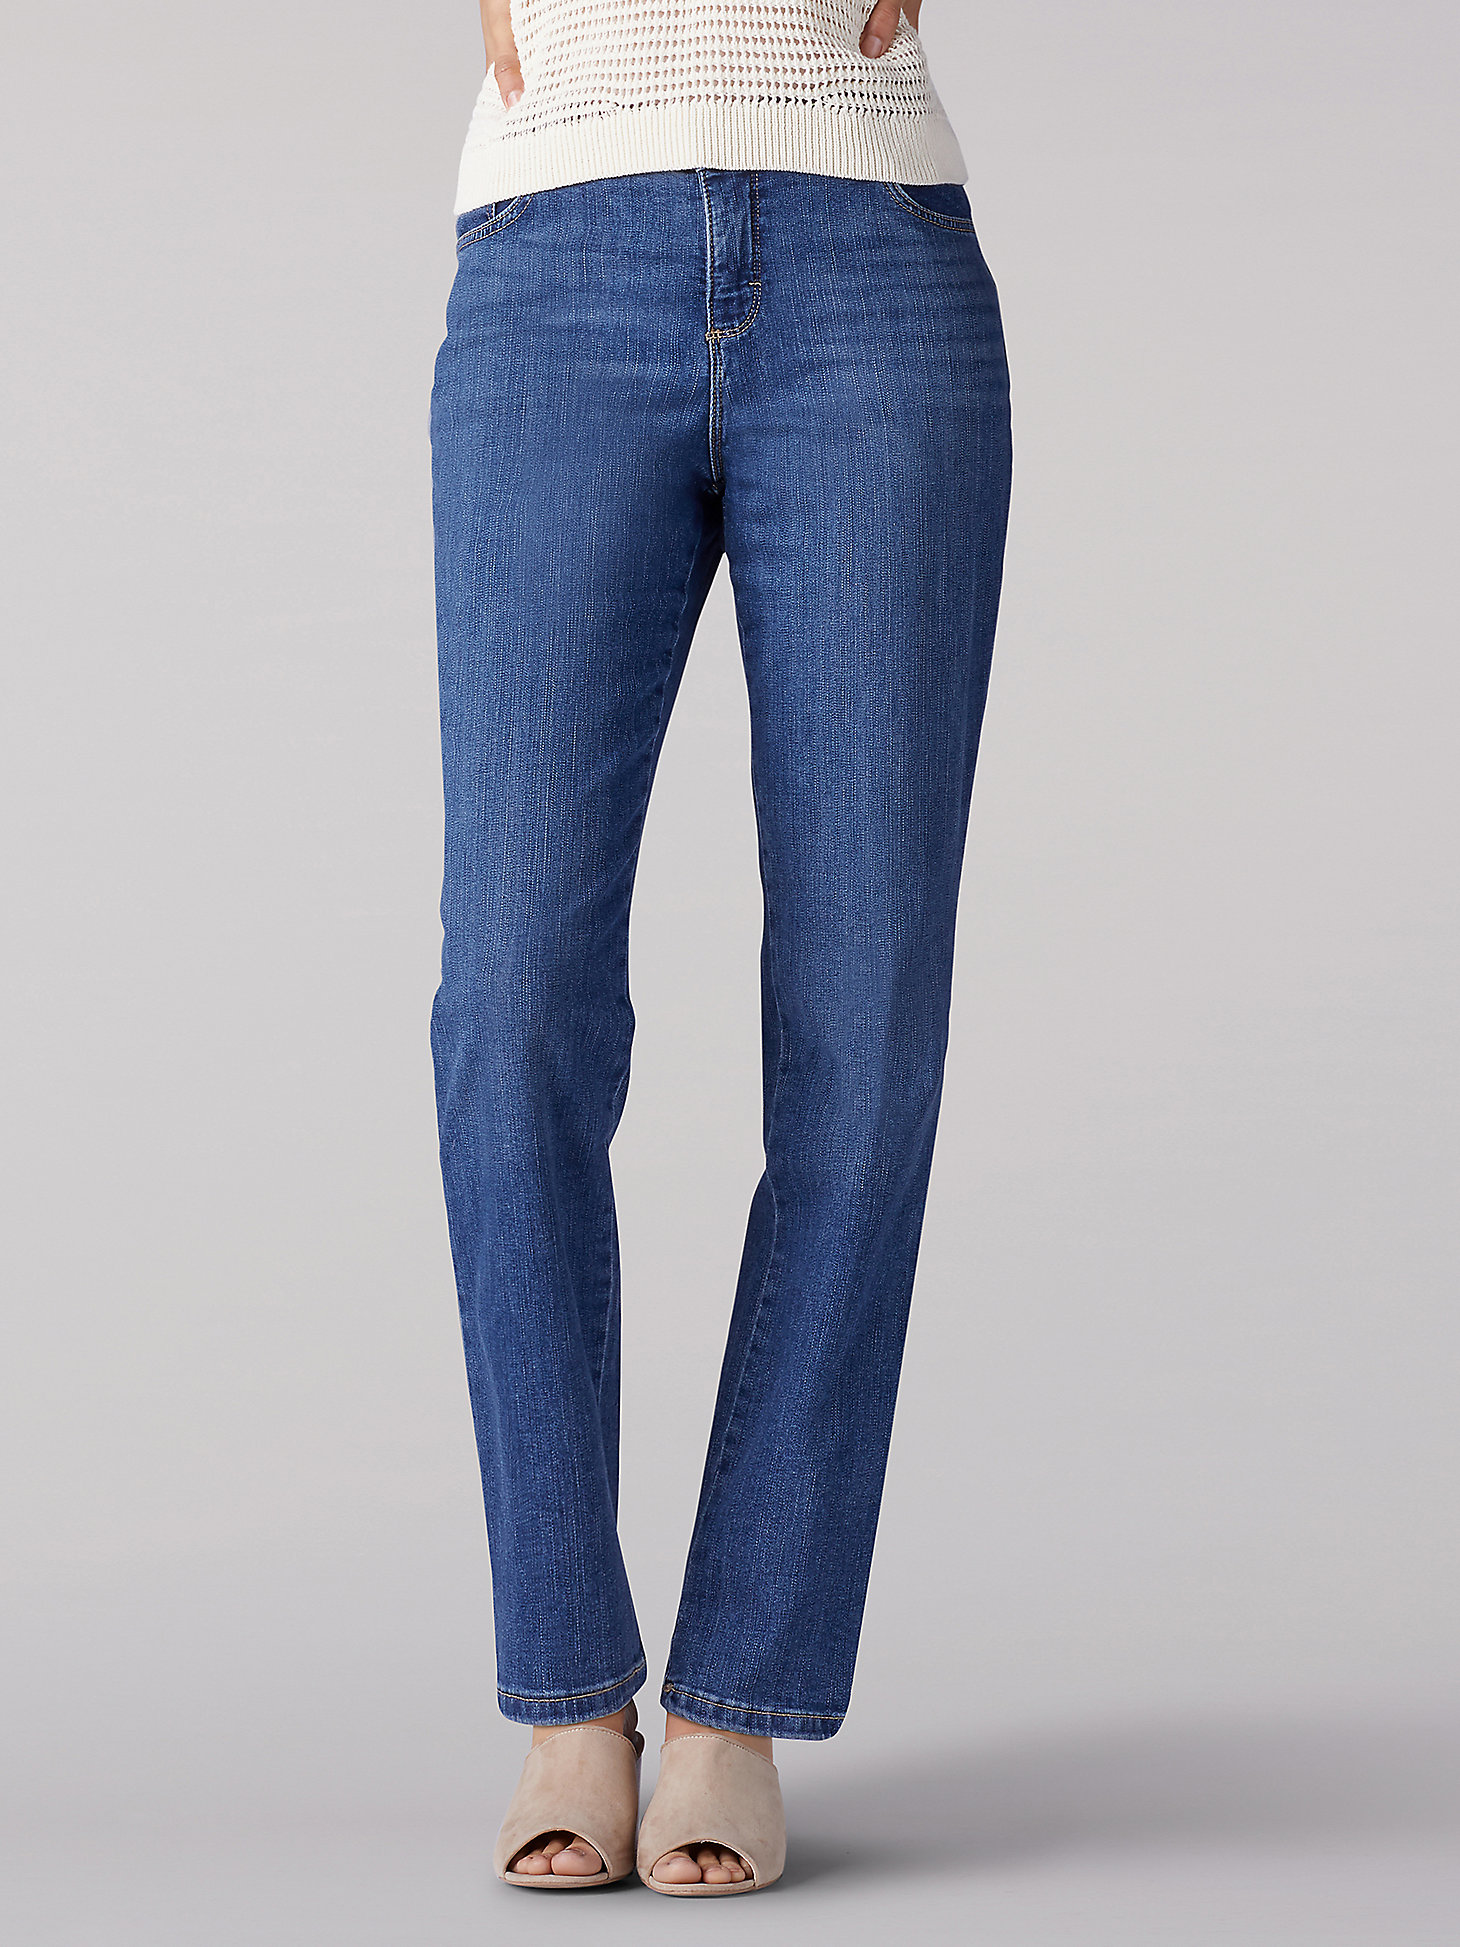 Women's Instantly Slims Relaxed Fit Straight Leg Jean Classic Fit